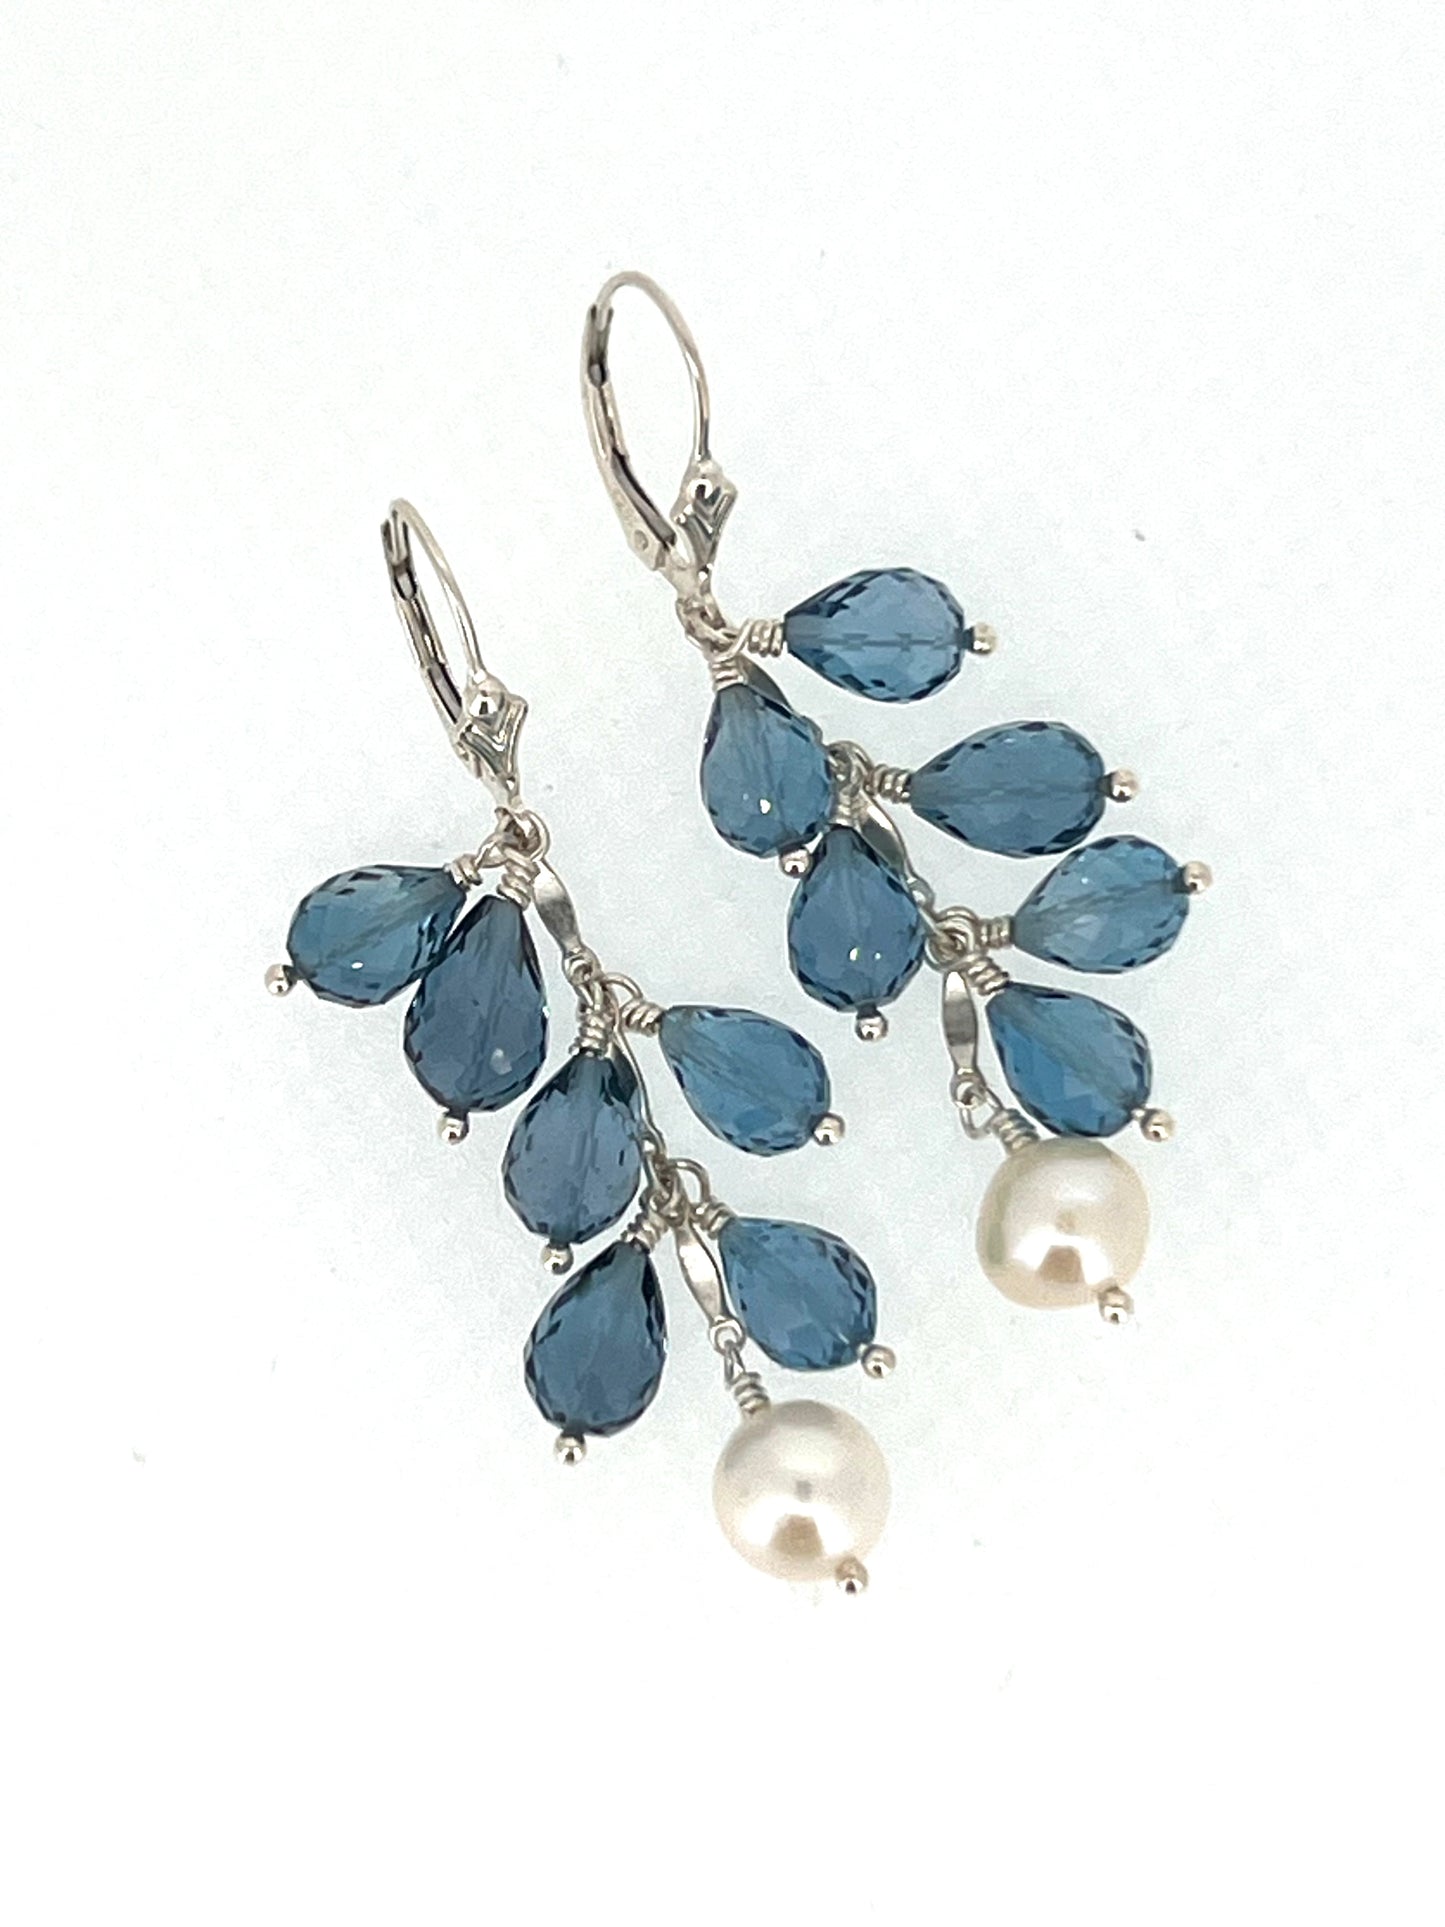 London Blue Topaz Briolette drops and Cultured Pearls on Sterling Silver Leverbacks